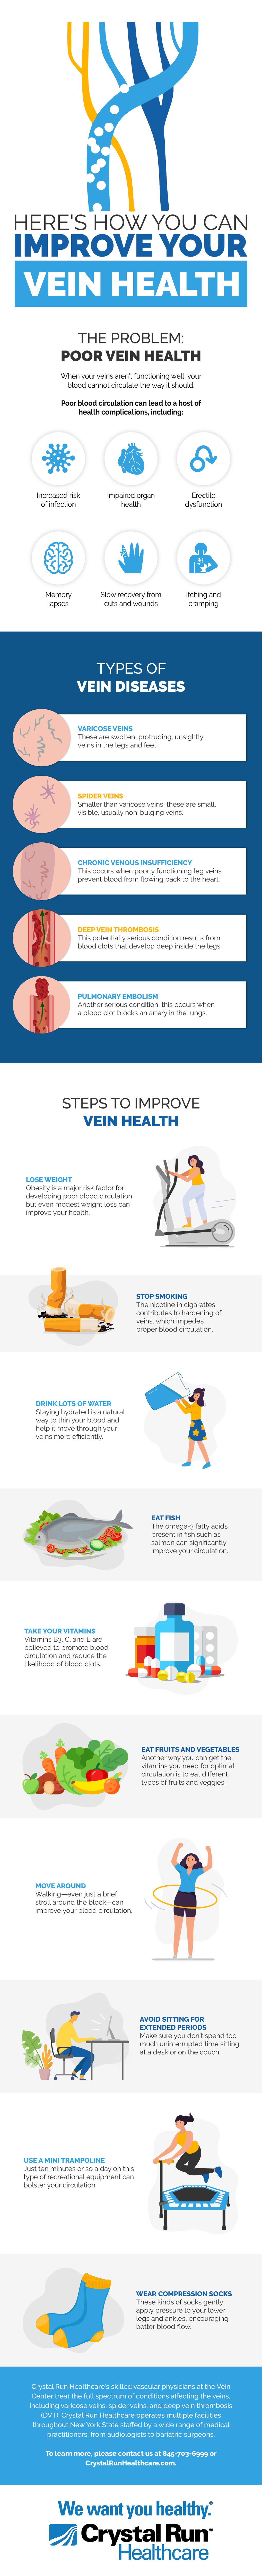 Here's How You Can Improve Your Vein Health Infographic